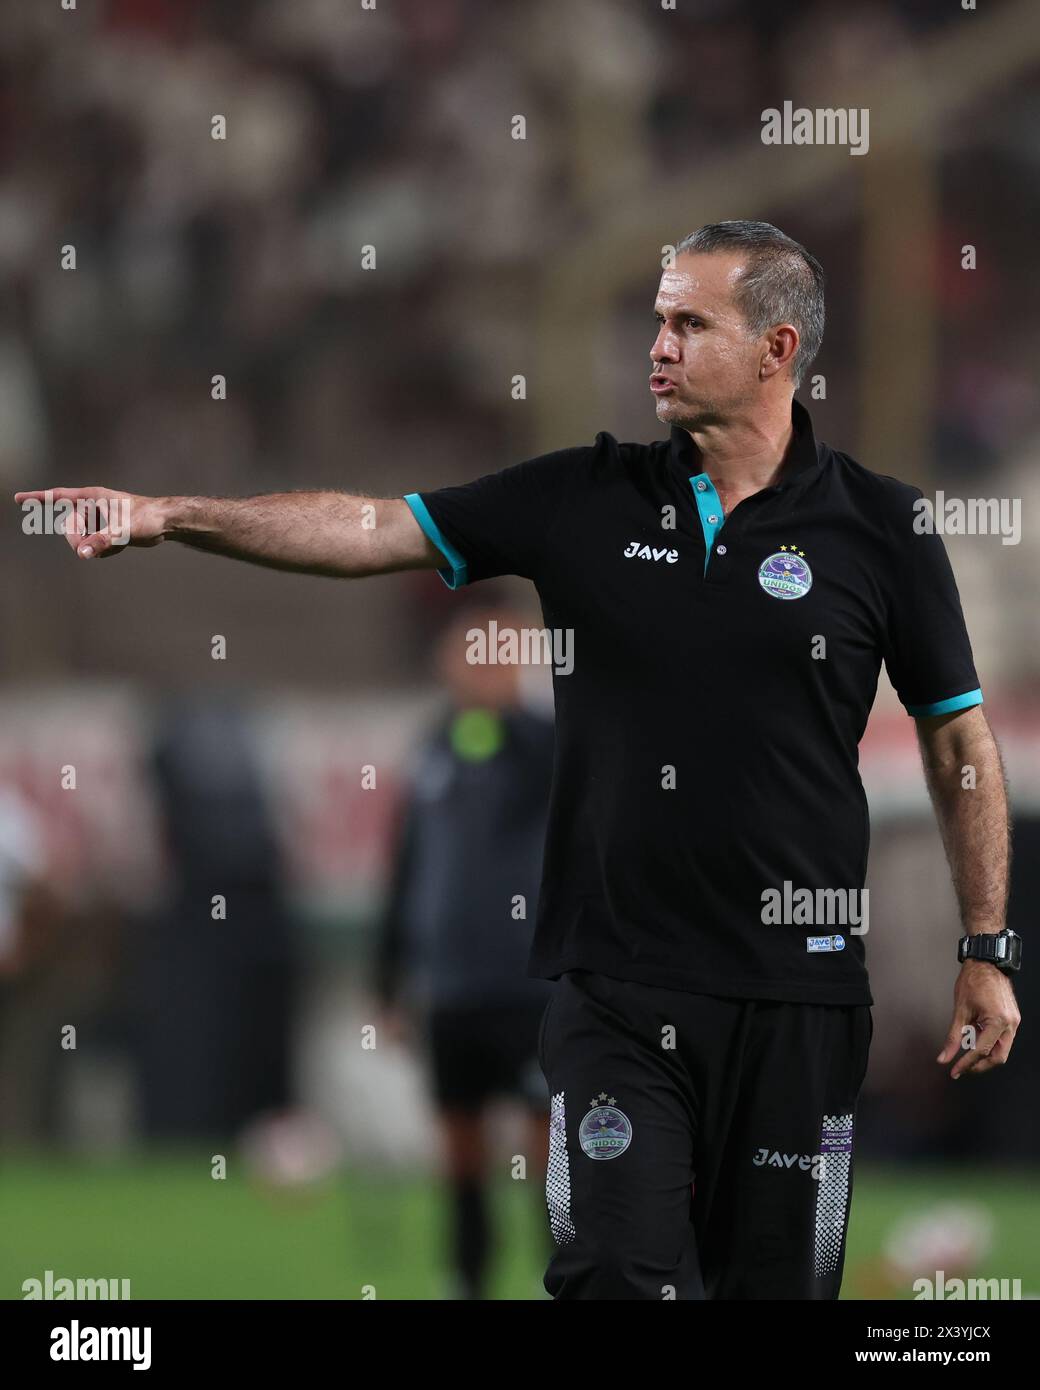 Lima, Peru. 29th Apr, 2024. Carlos Silvestri coach of Comerciantes Unidosduring the Torneo Apertura Liga 1 Apuesta Total 2024 match, date 13 between Universitario de Deportes and Comerciantes Unidos played at Monumental Stadium on April 29, 2024 in Lima, Peru. (Photo by Miguel Marruffo/PRESSINPHOTO) Credit: PRESSINPHOTO SPORTS AGENCY/Alamy Live News Stock Photo